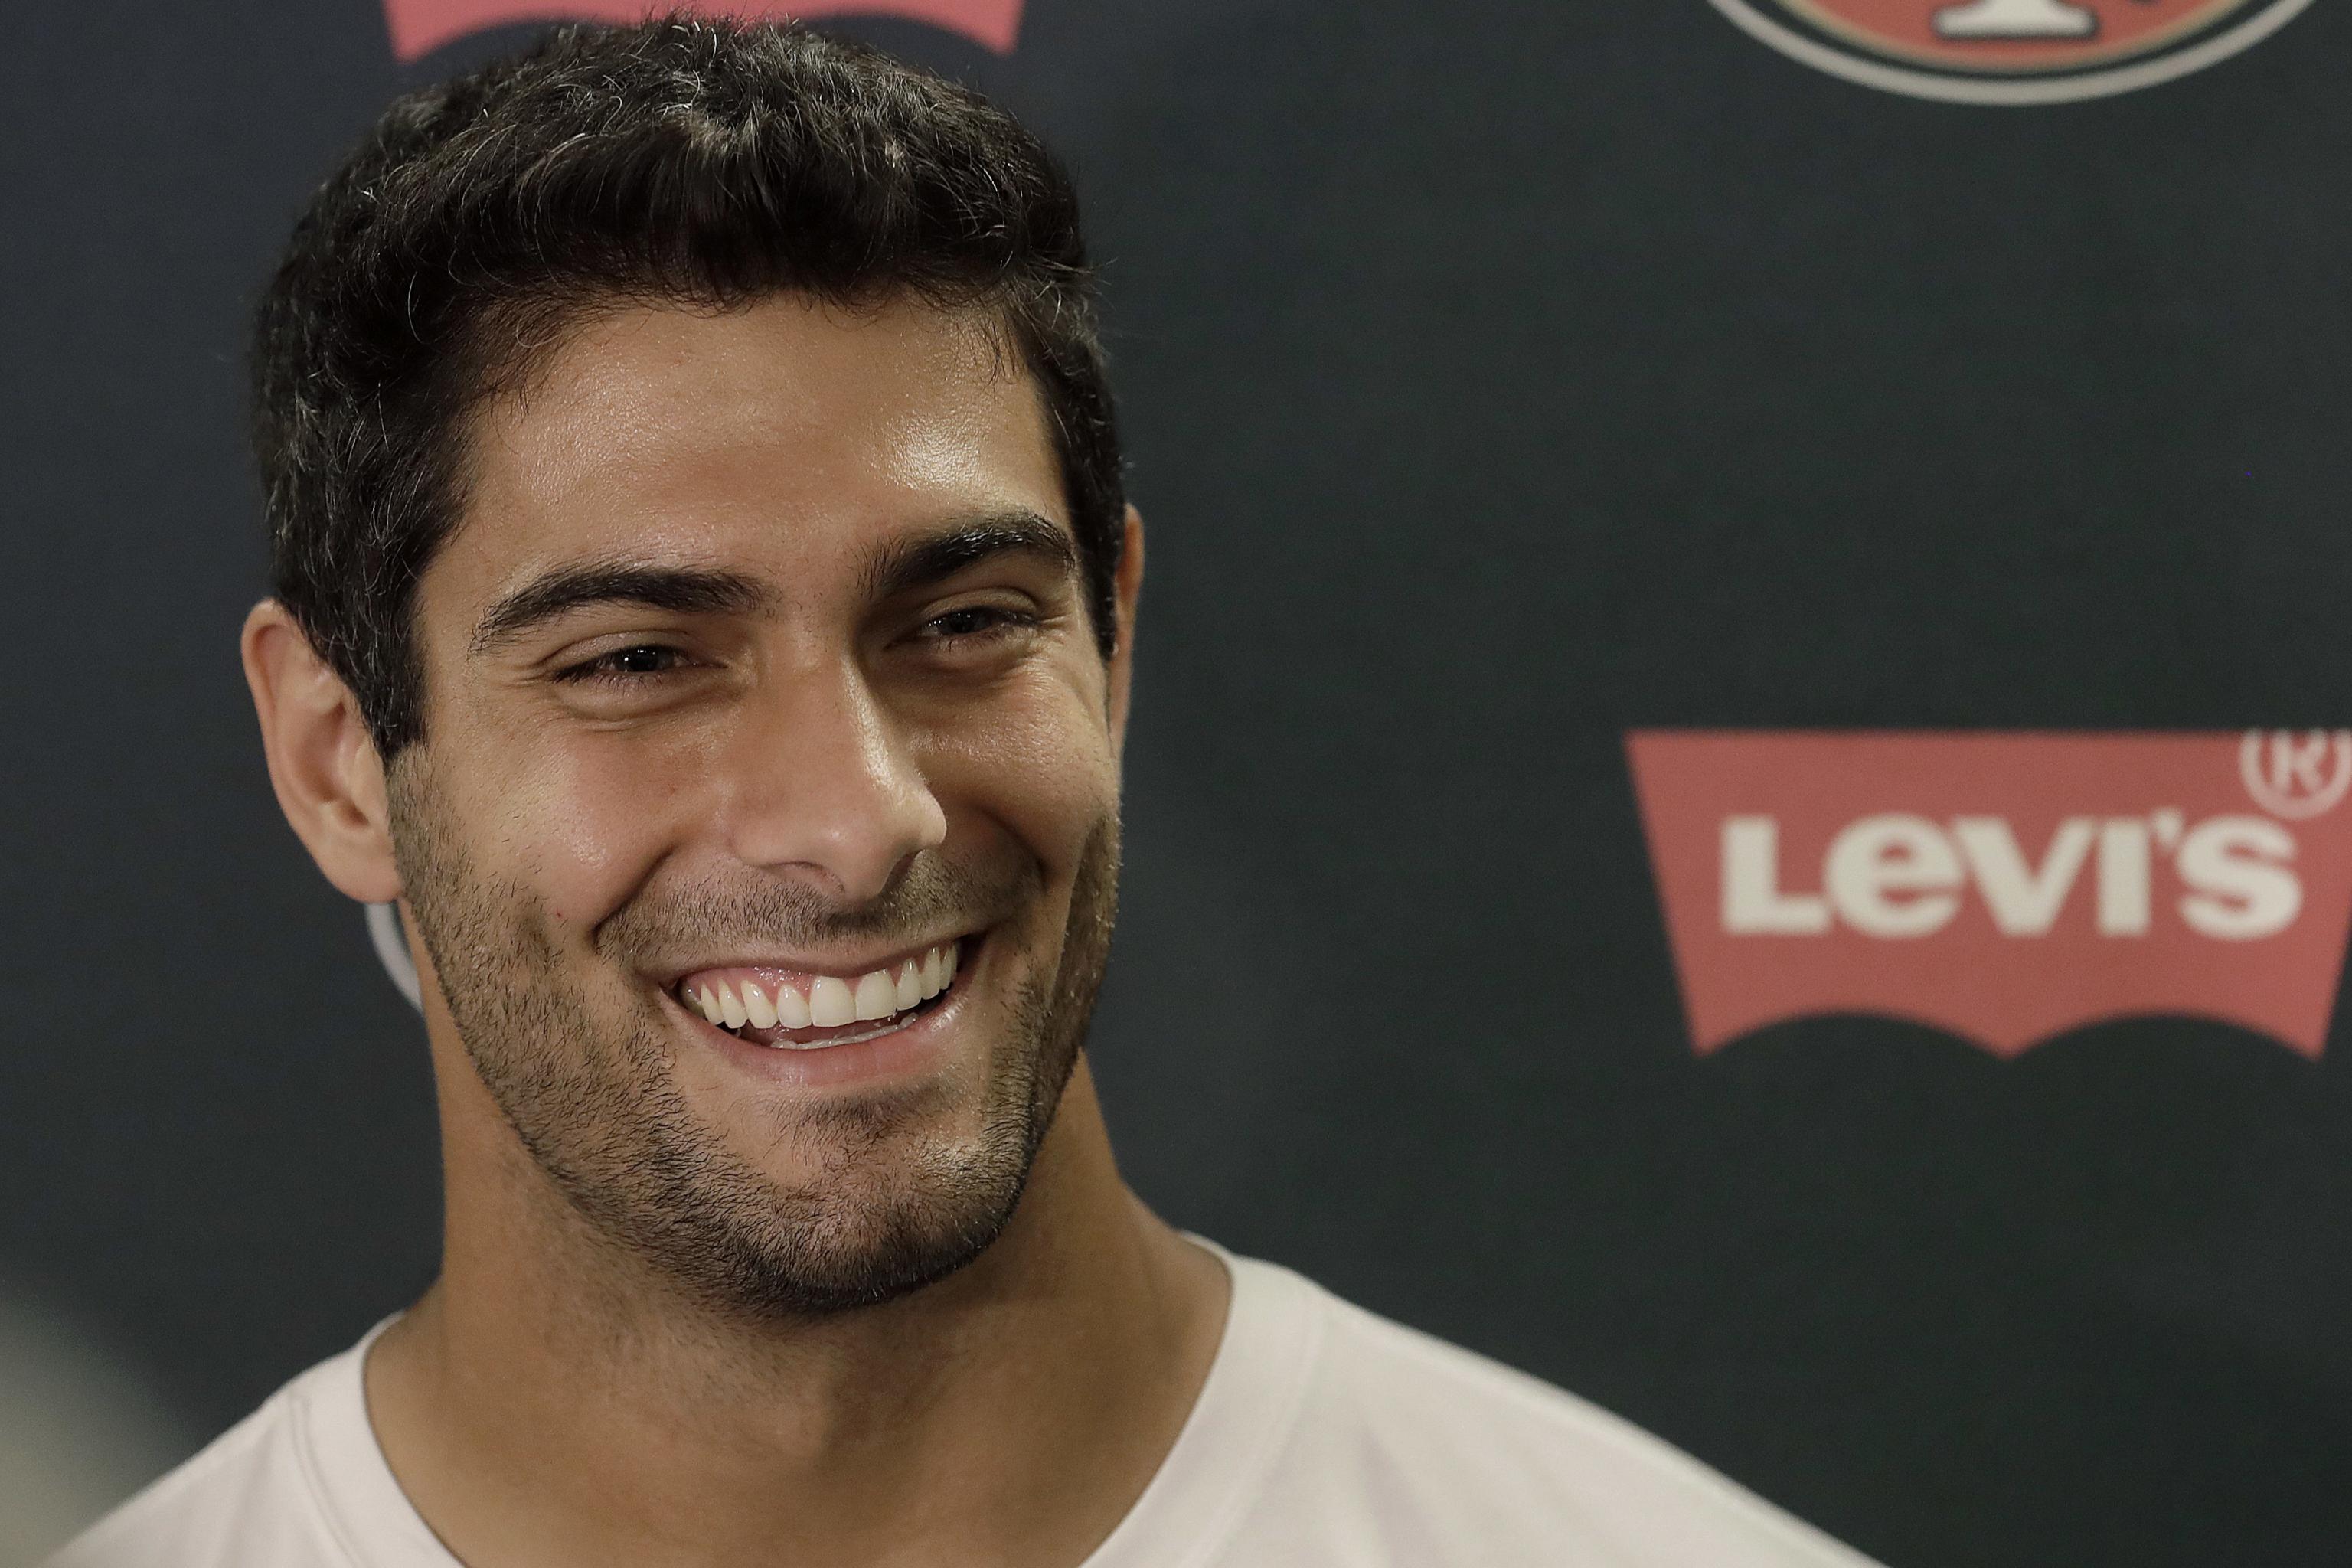 Porn Star Kiara Mia Speaks to TMZ About Her Date with Jimmy Garoppolo |  News, Scores, Highlights, Stats, and Rumors | Bleacher Report